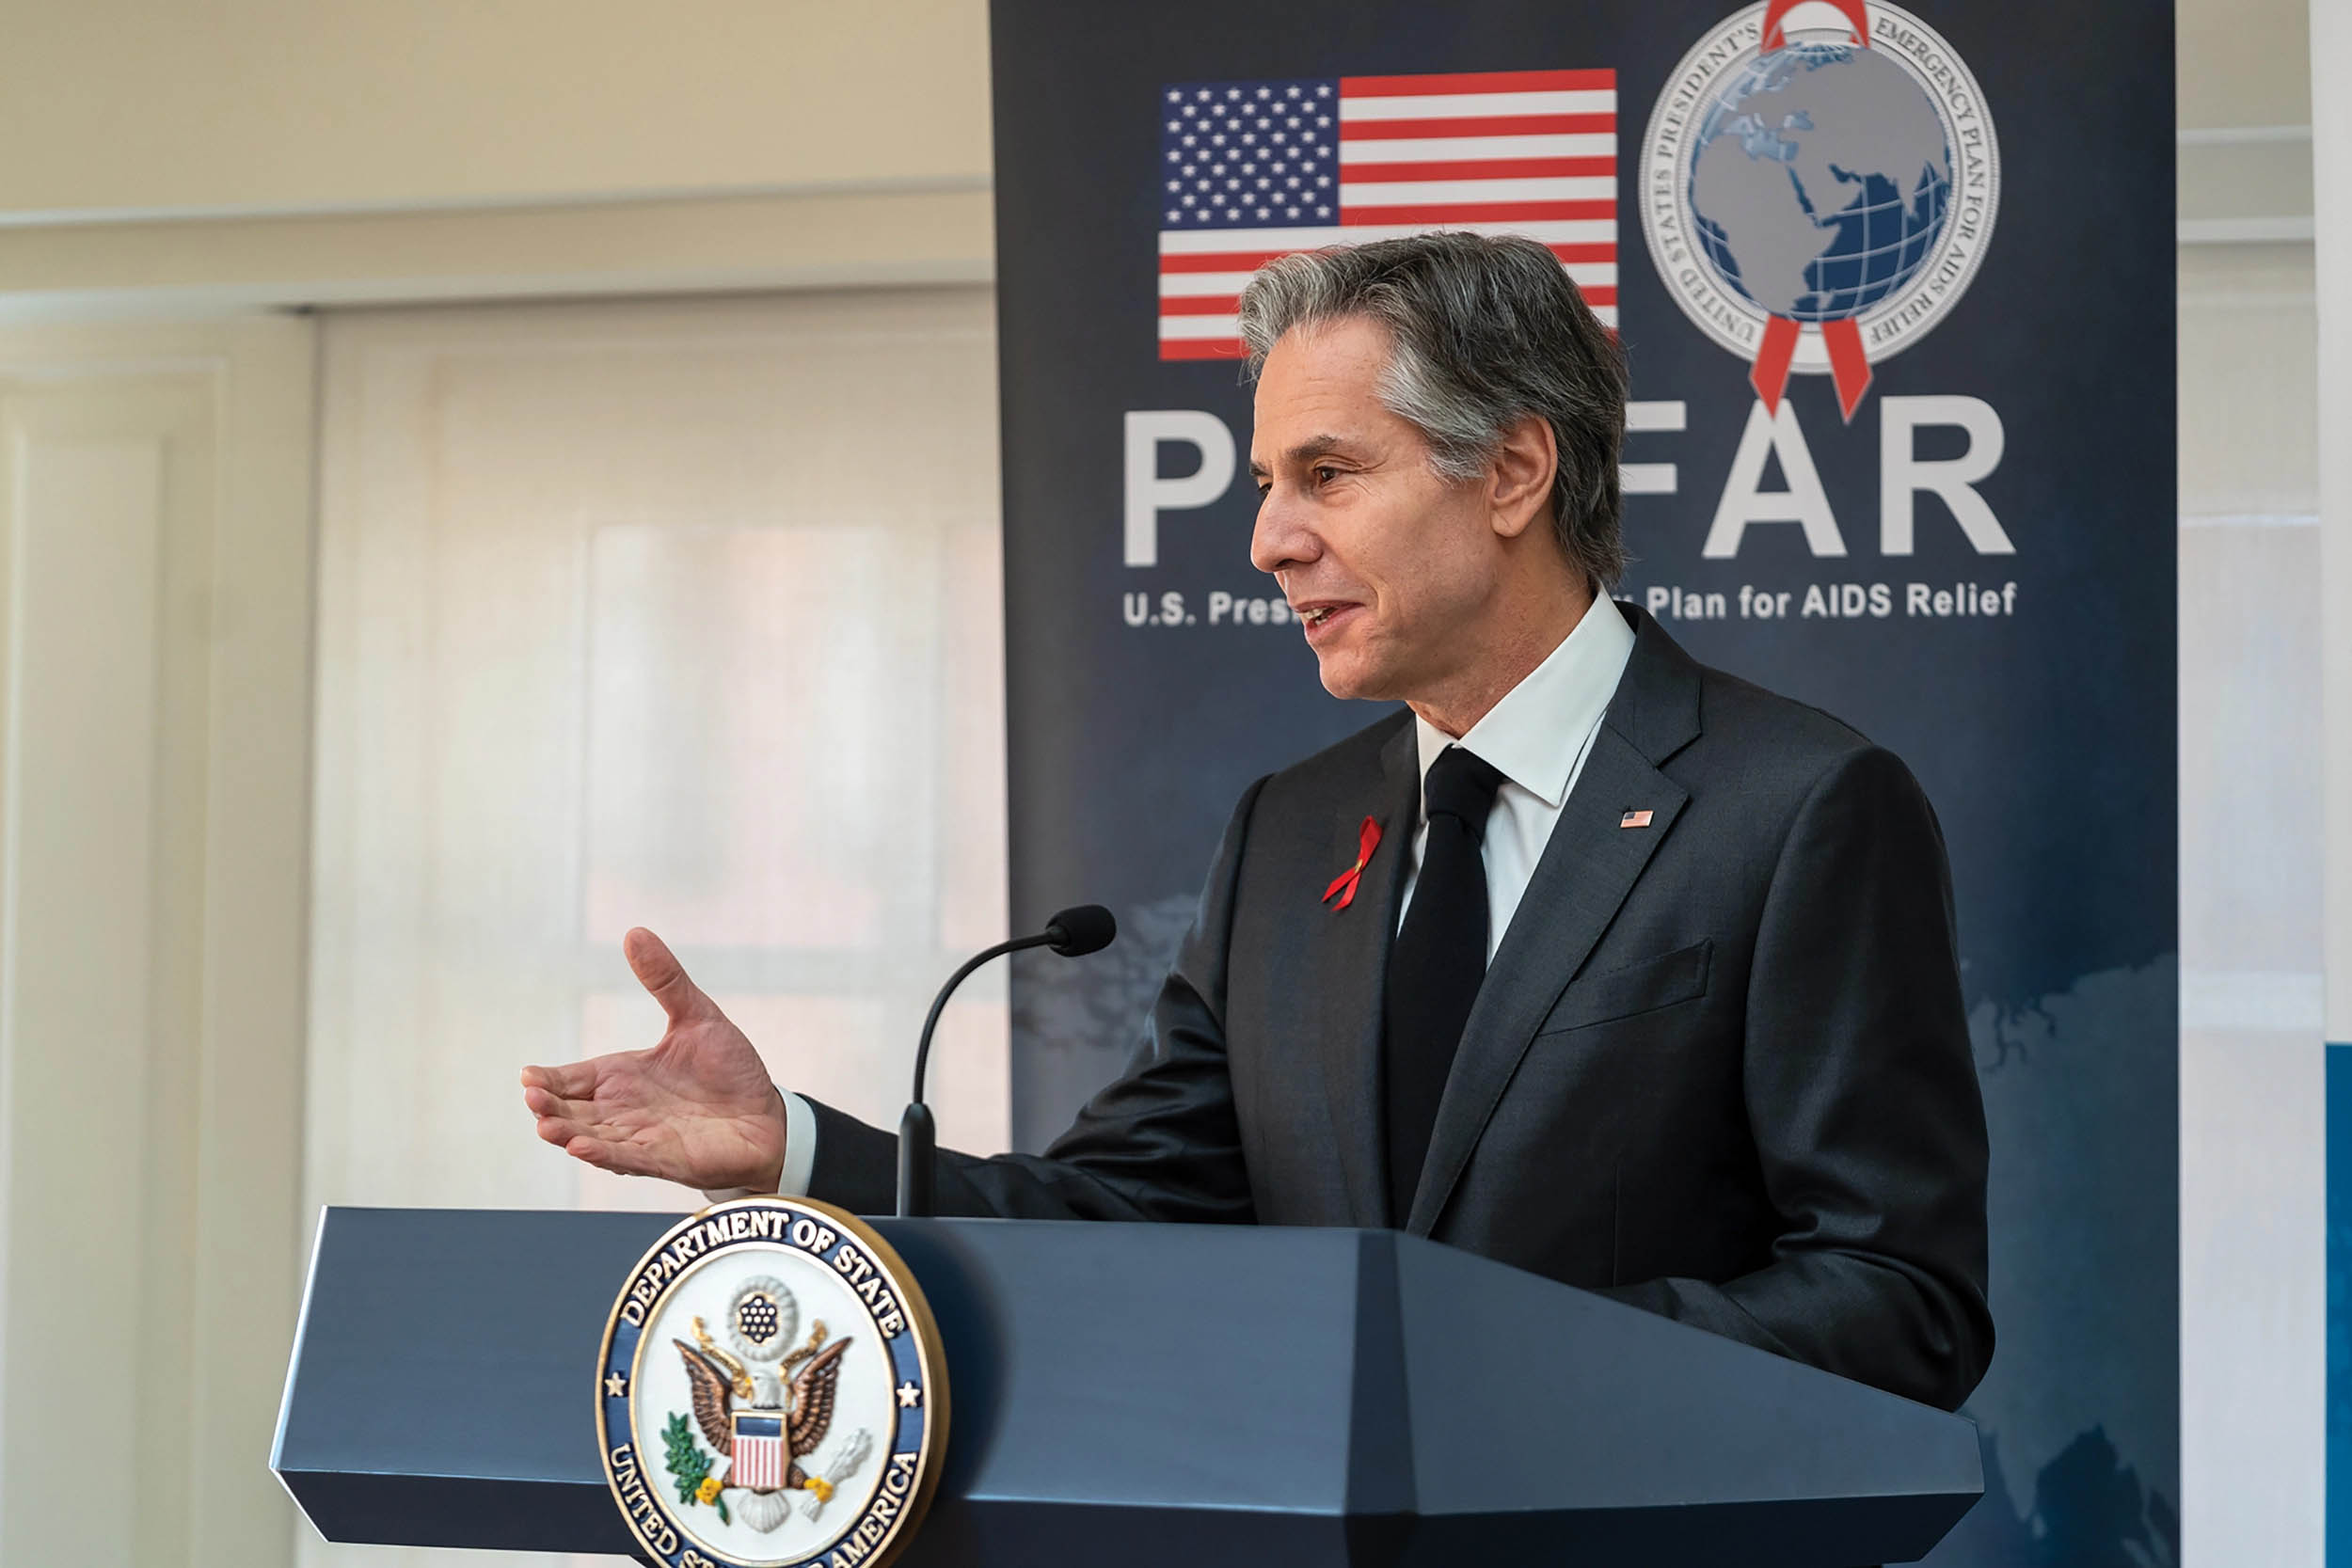 Secretary of State Antony J. Blinken delivers remarks at World AIDS Day event hosted by Business Council for International Understanding, in Washington, DC, December 2, 2022 (State Department/Ron Przysucha)